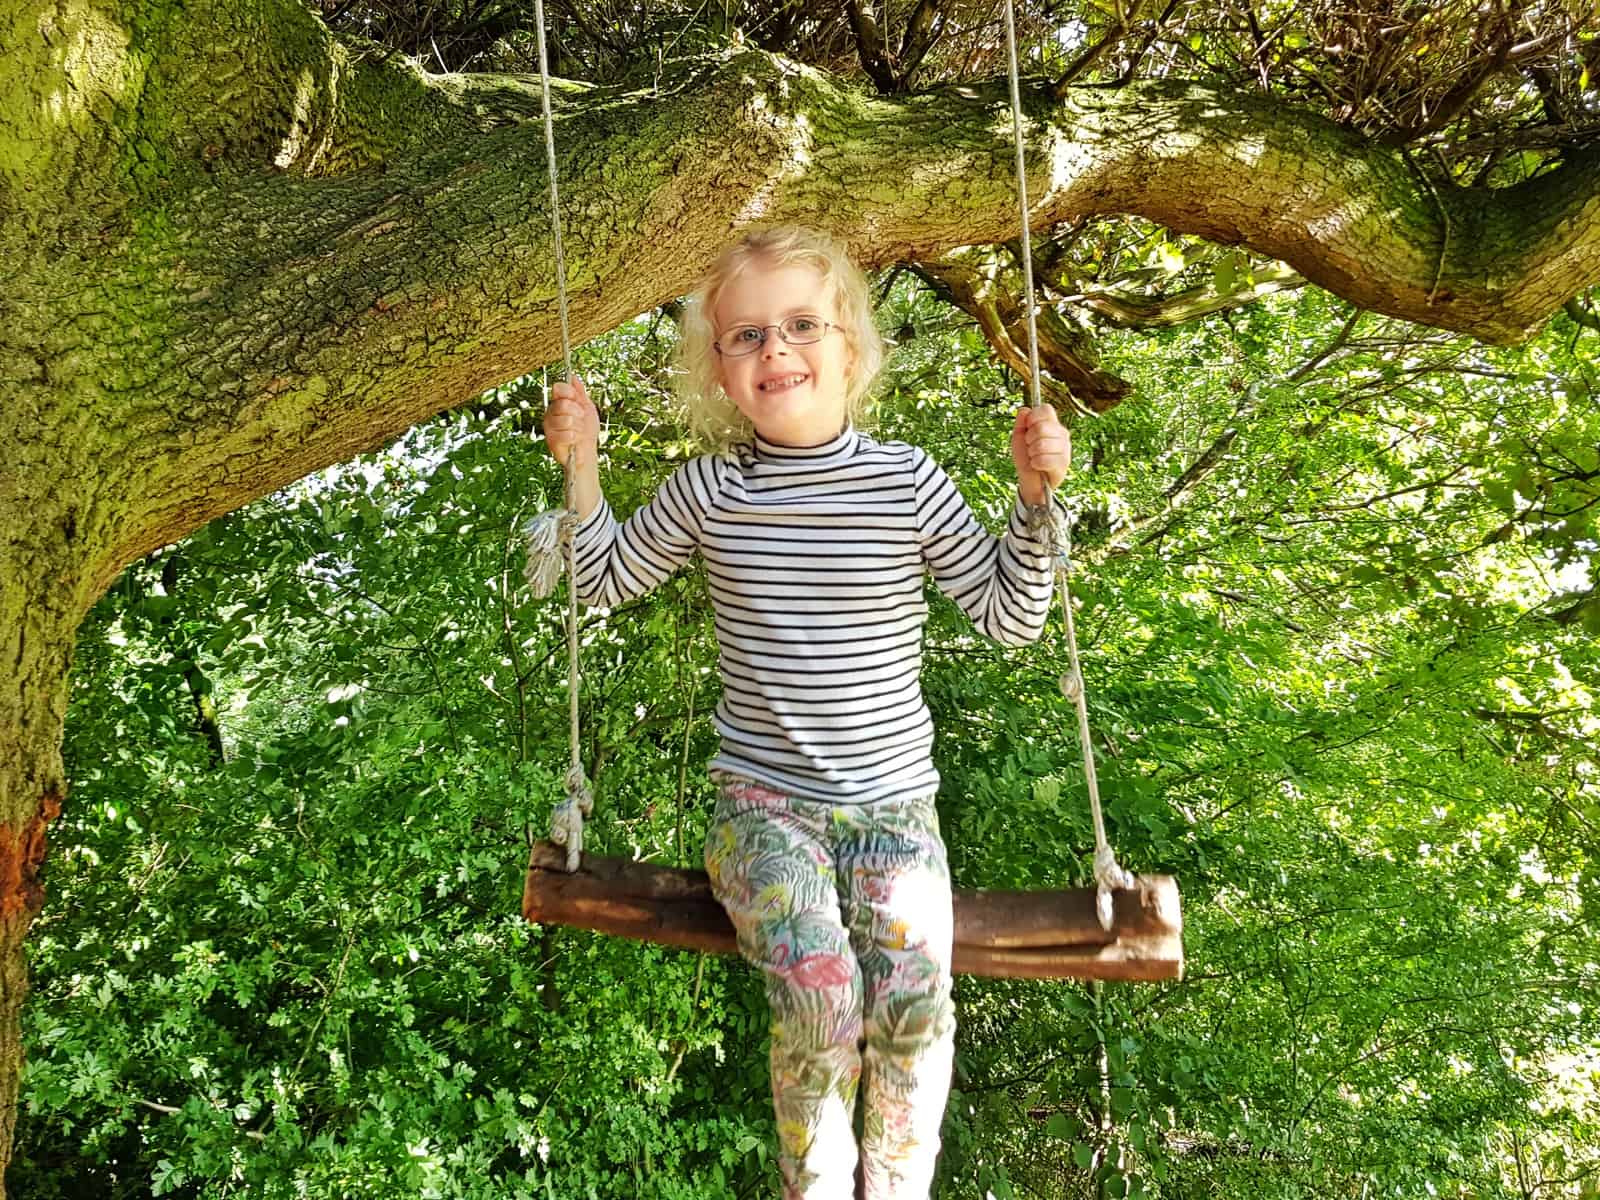 10 tips to prepare your child for tooth extraction girl on a swing before extraction